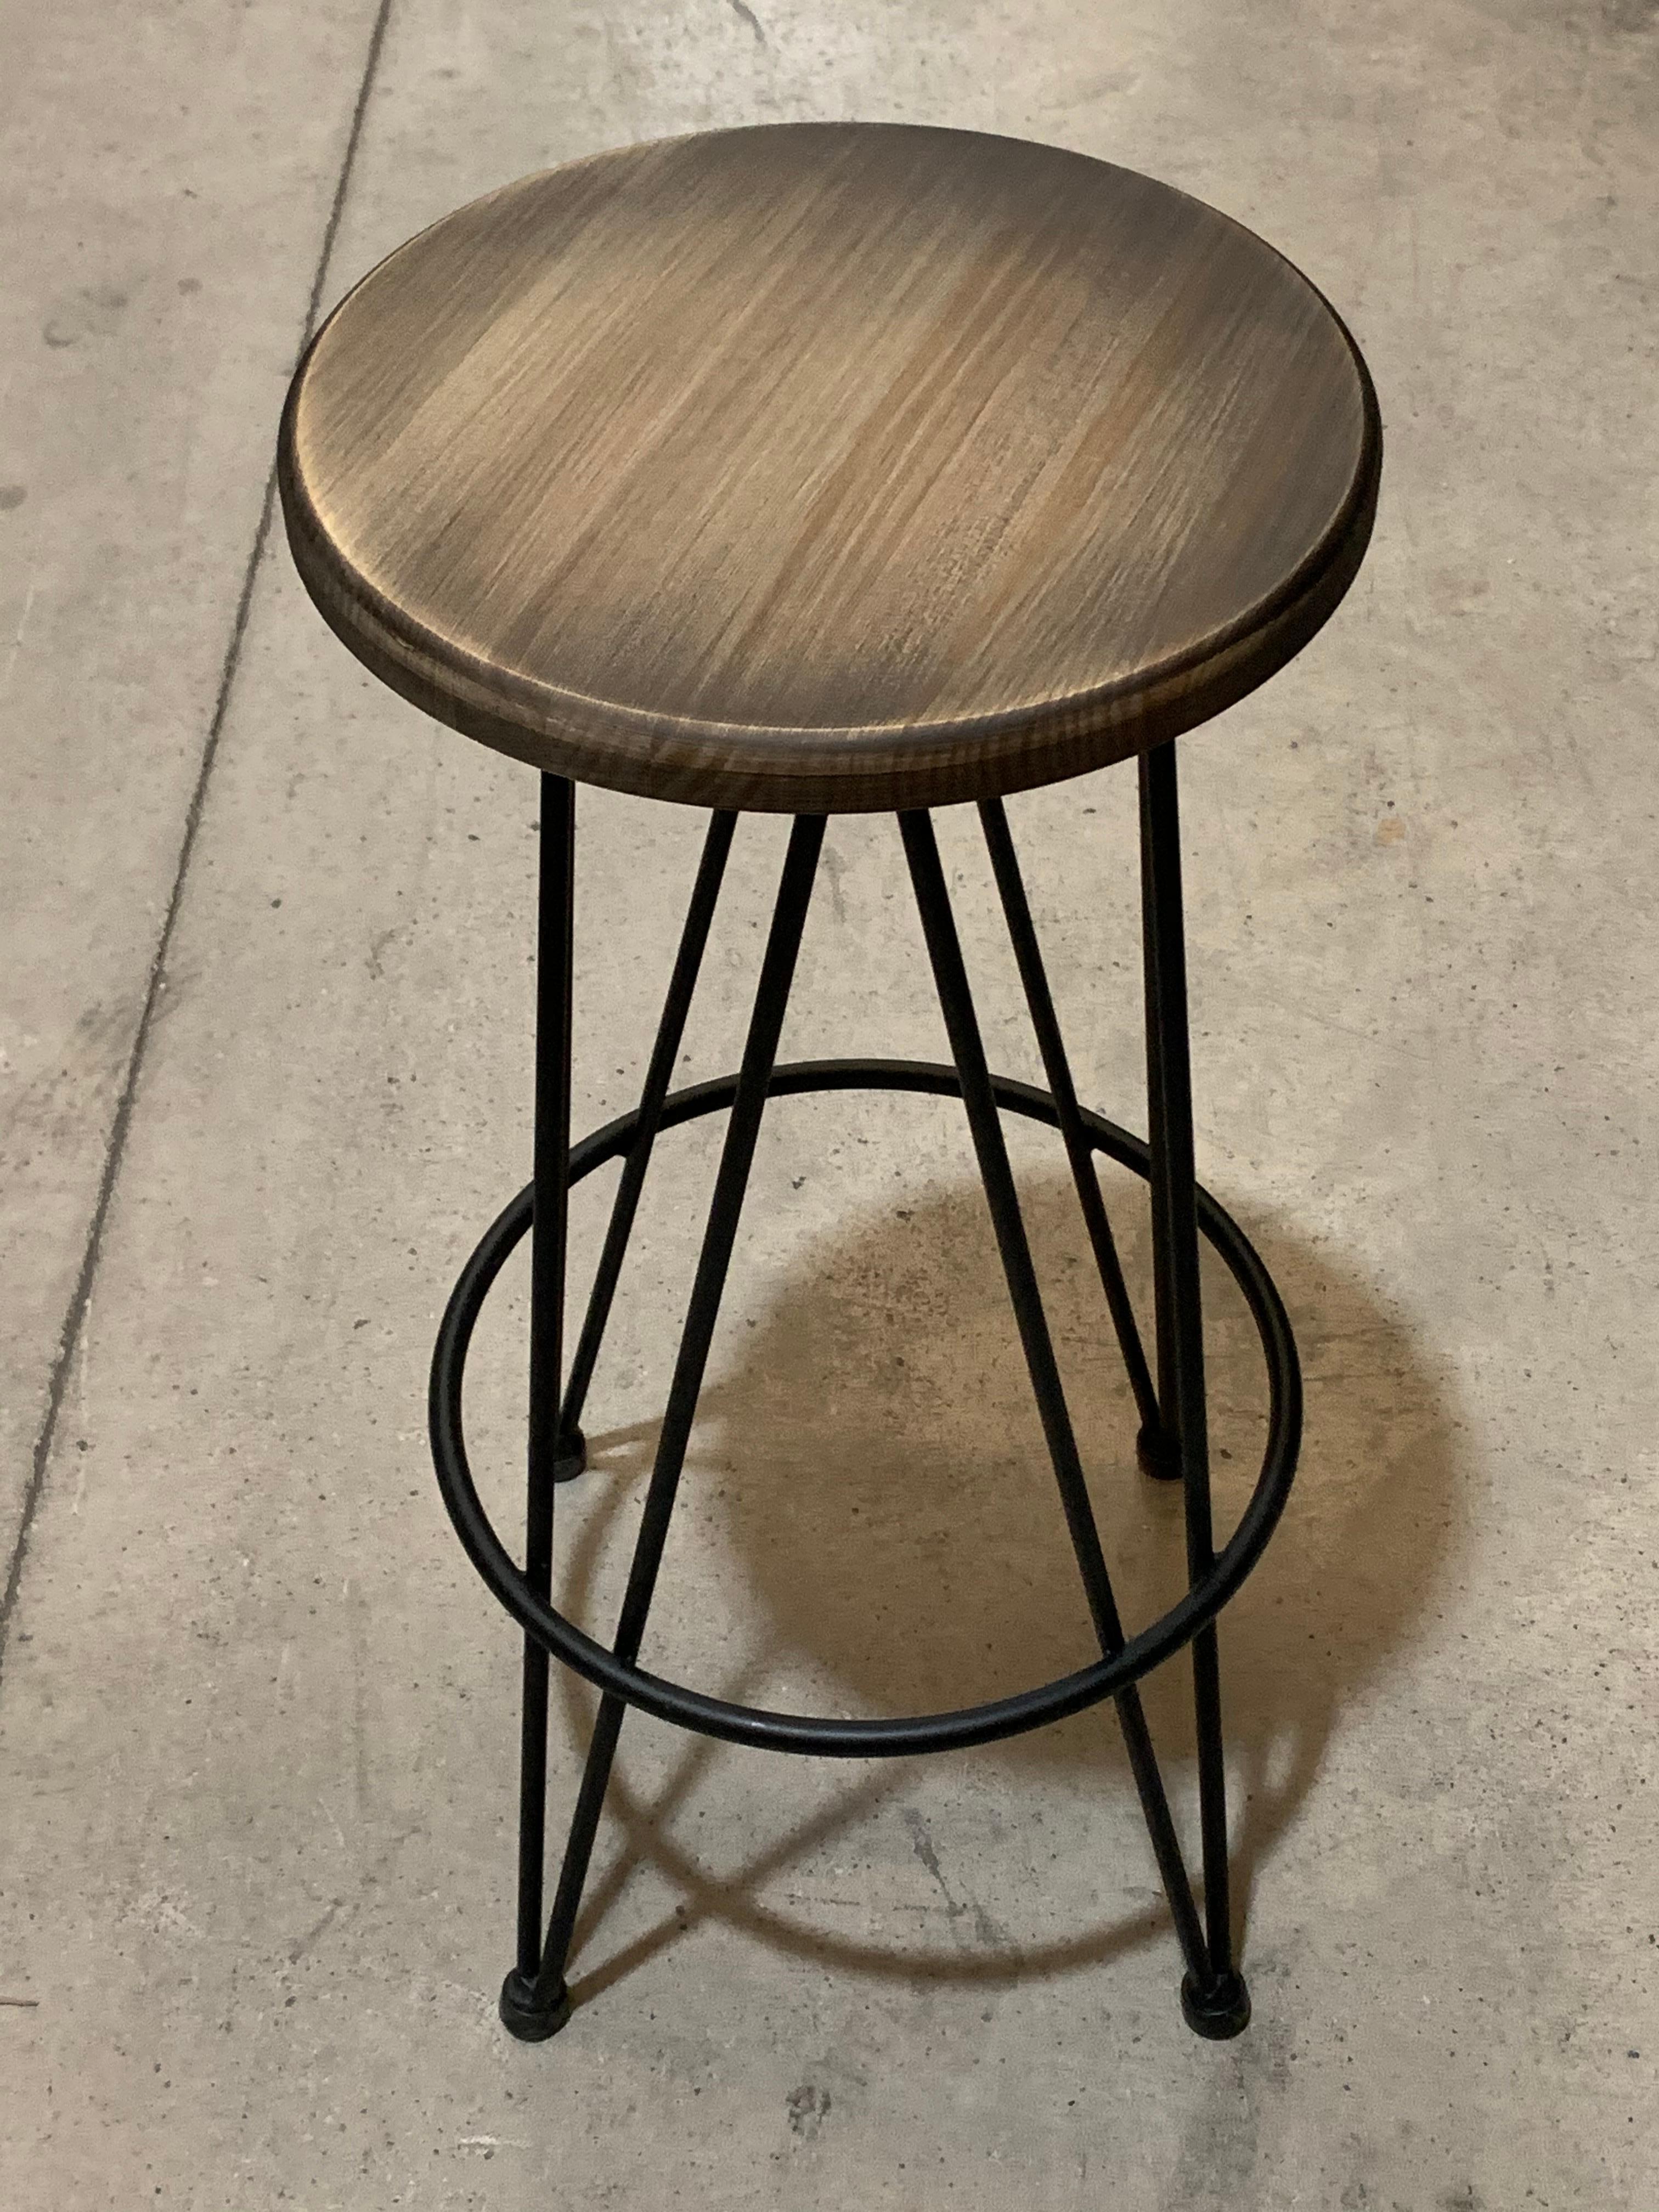 Spanish New Industrial Wrought Iron Shop Stool with Wood Seat For Sale